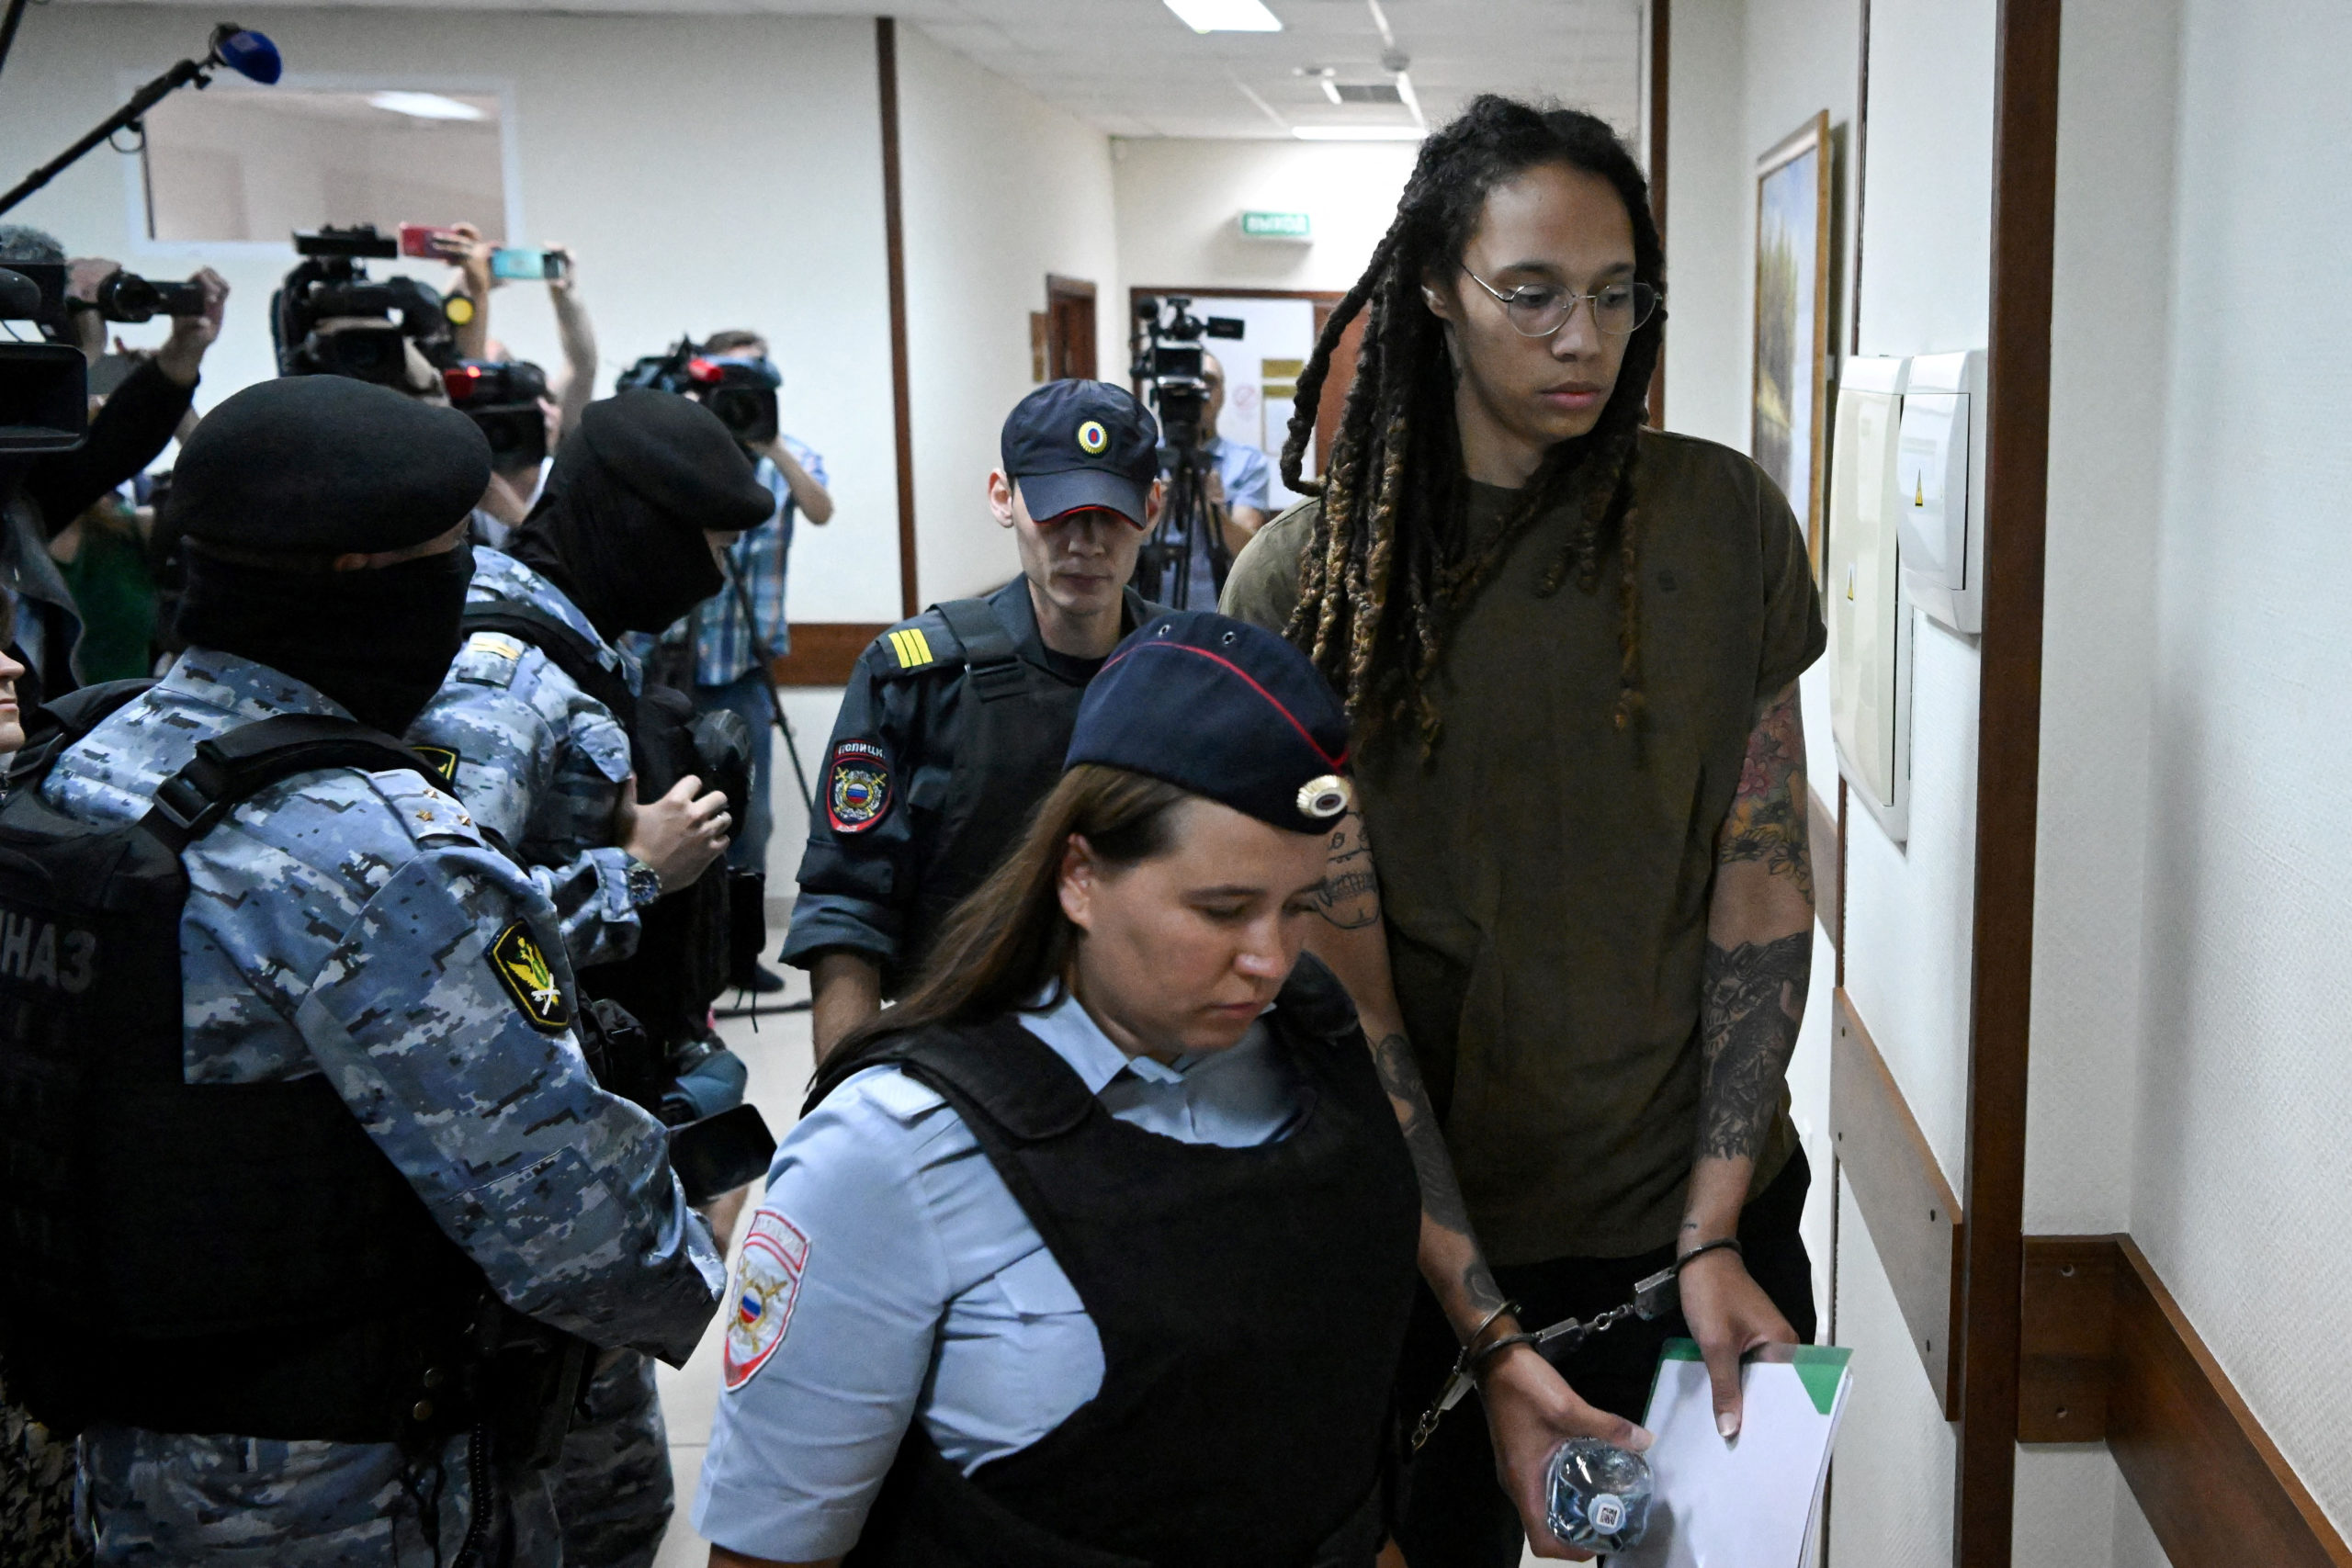 U.S. basketball player Brittney Griner, who was detained at Moscow's Sheremetyevo airport and later charged with illegal possession of cannabis, is escorted before a court hearing in Khimki outside Moscow, Russia August 2, 2022. 